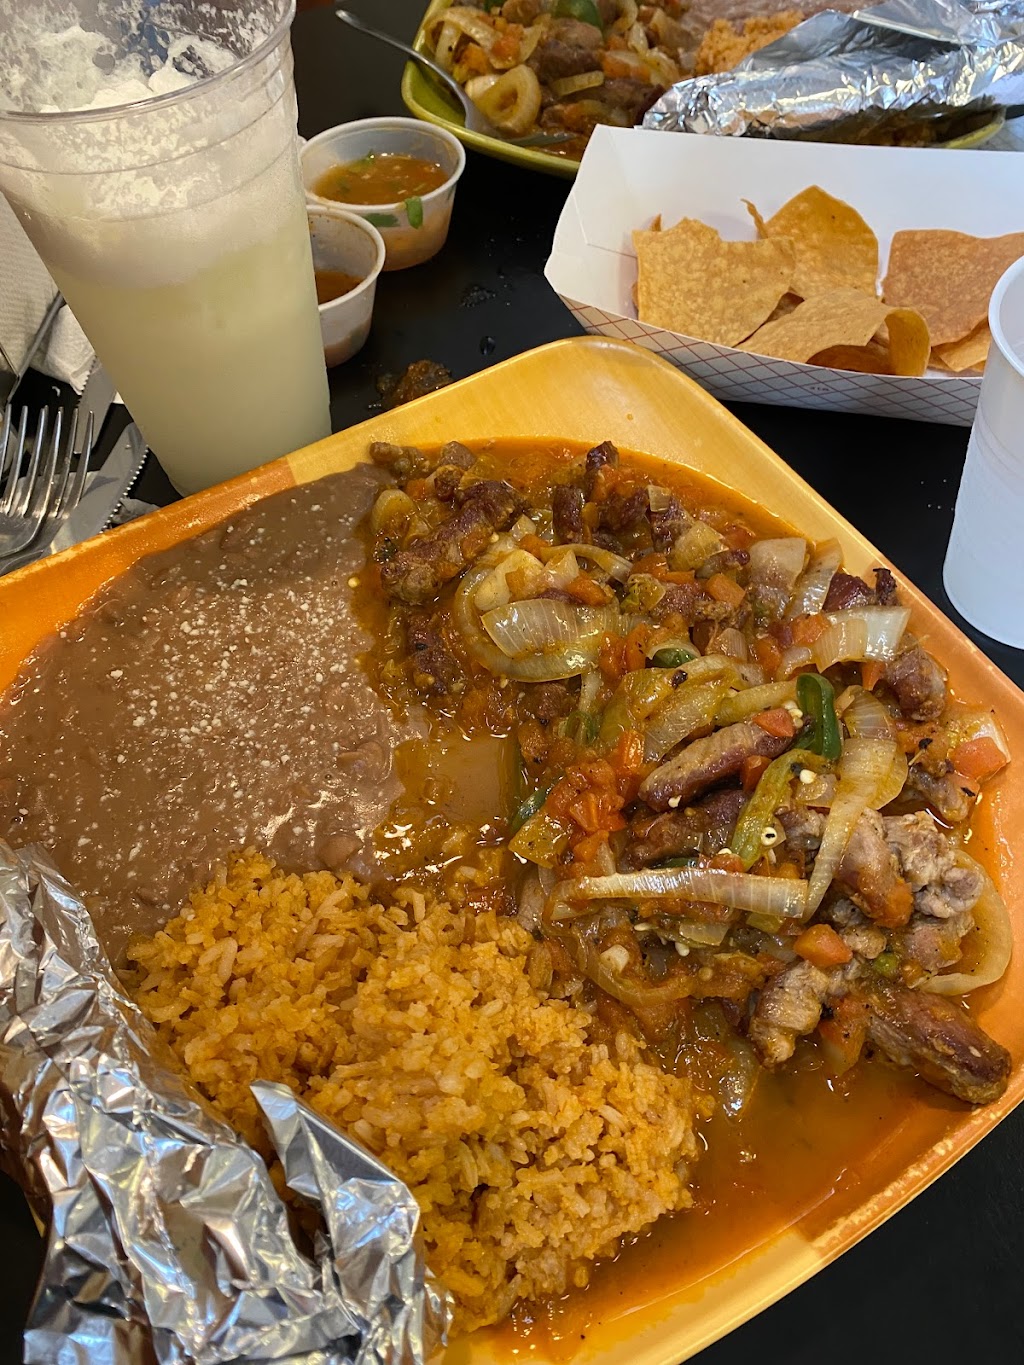 Lilys Mexican Restaurant | 4601 S Kingshighway Blvd, St. Louis, MO 63109, USA | Phone: (314) 352-1894